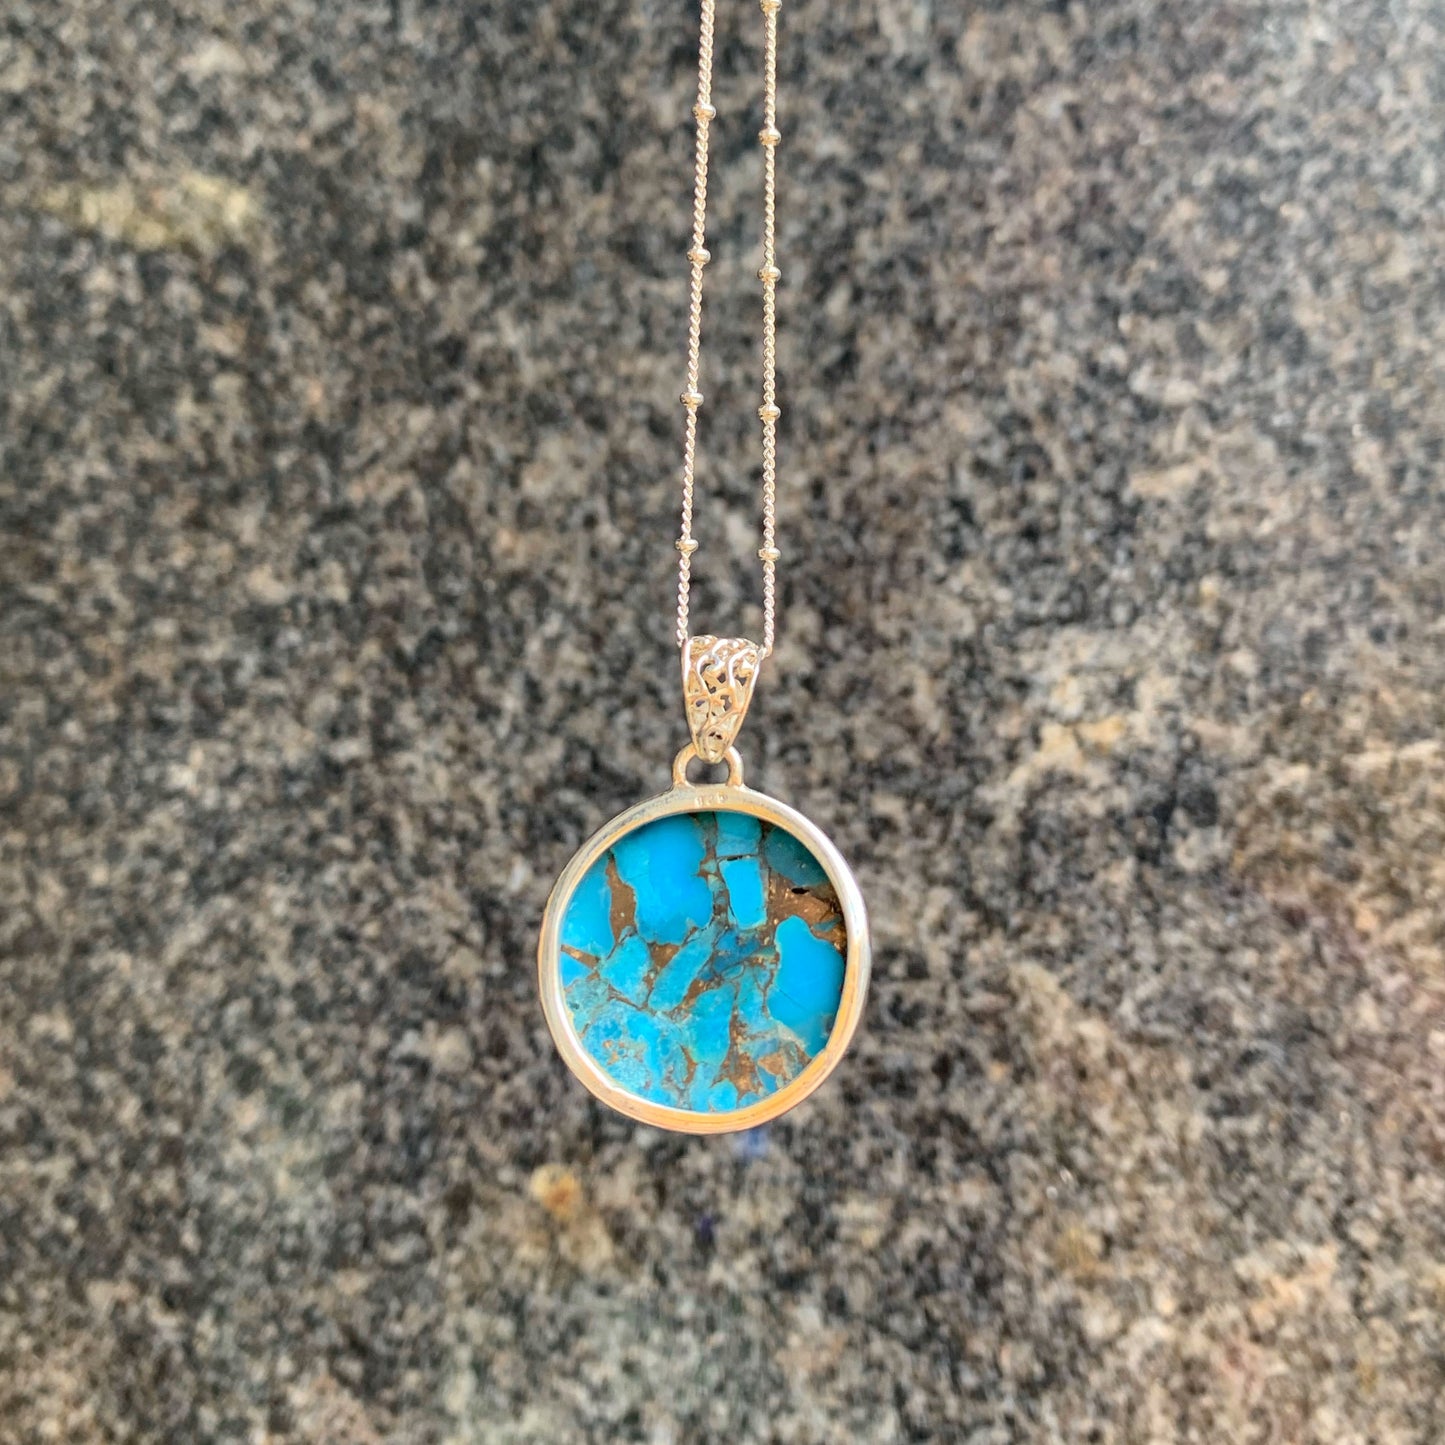 Round Bohemian Inspired Sterling Silver Turquoise Pendant